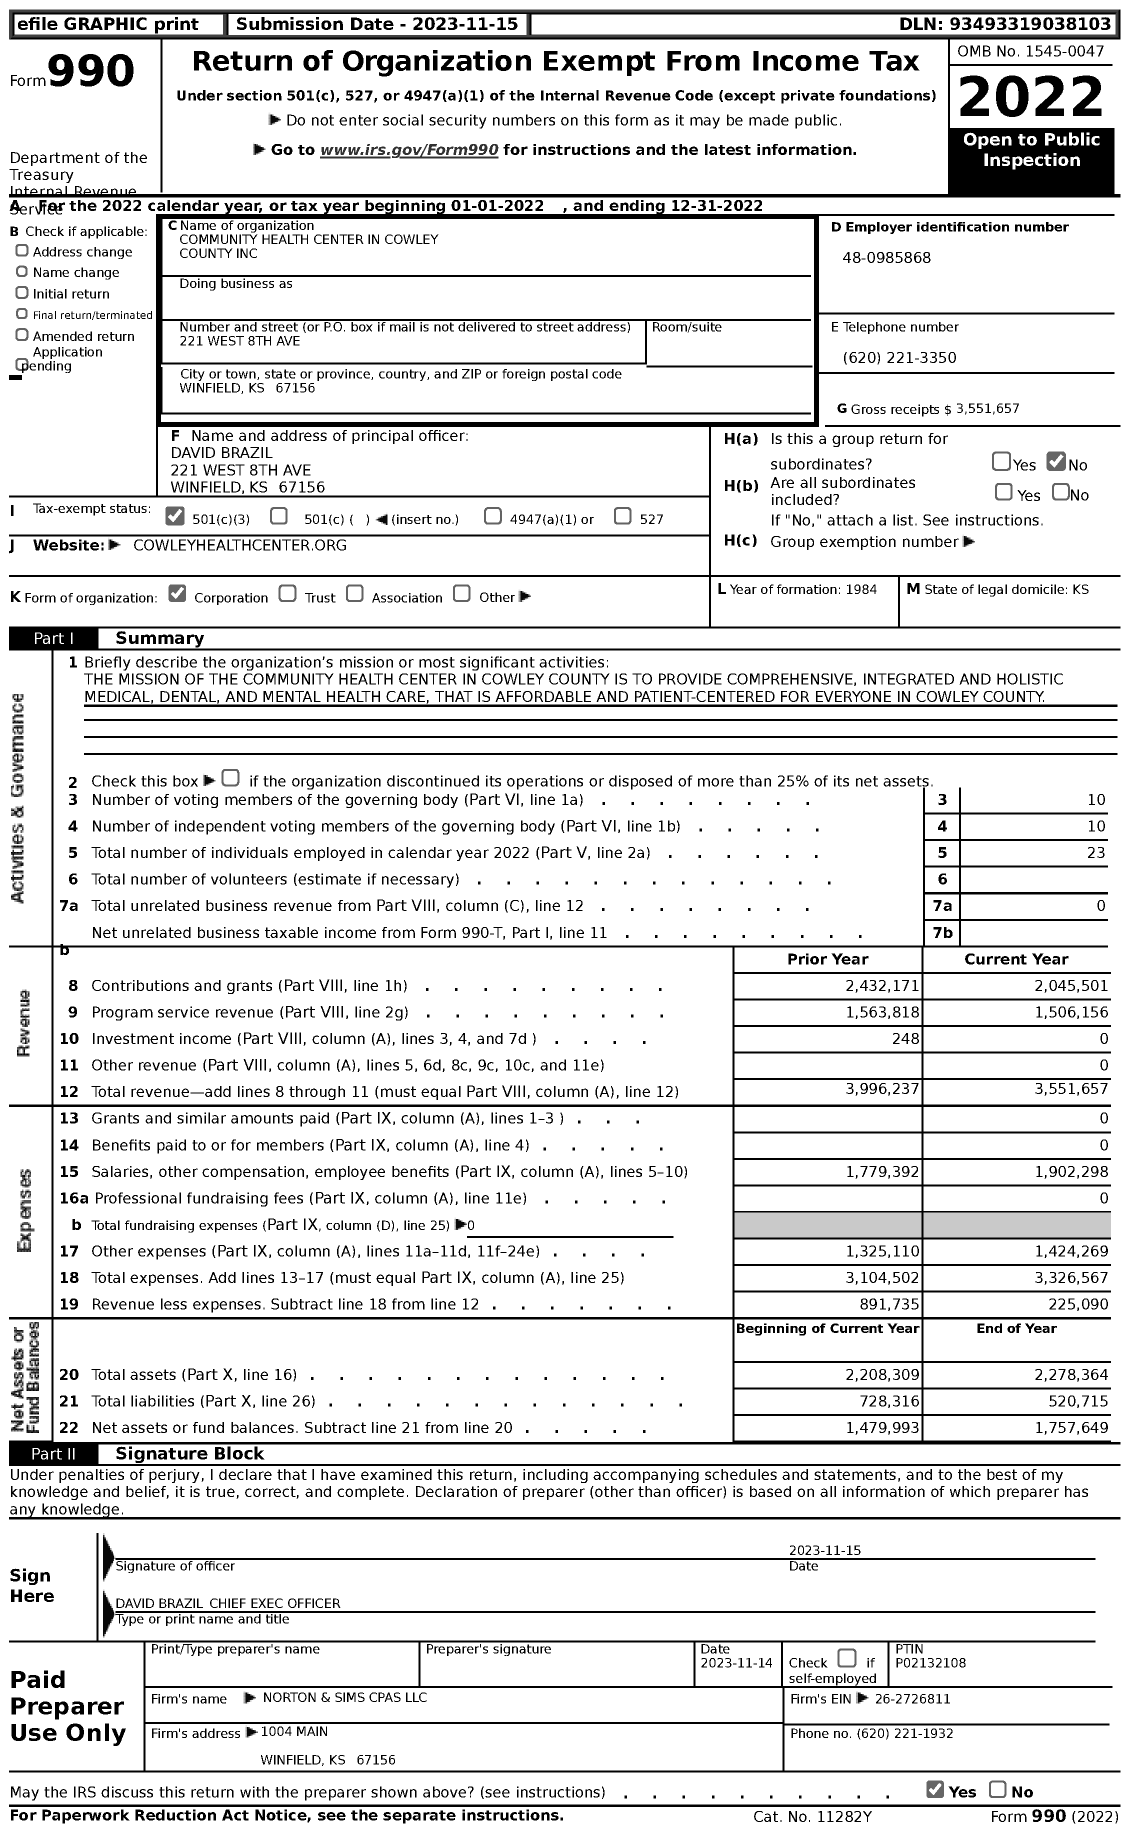 Image of first page of 2022 Form 990 for Community Health Center in Cowley County